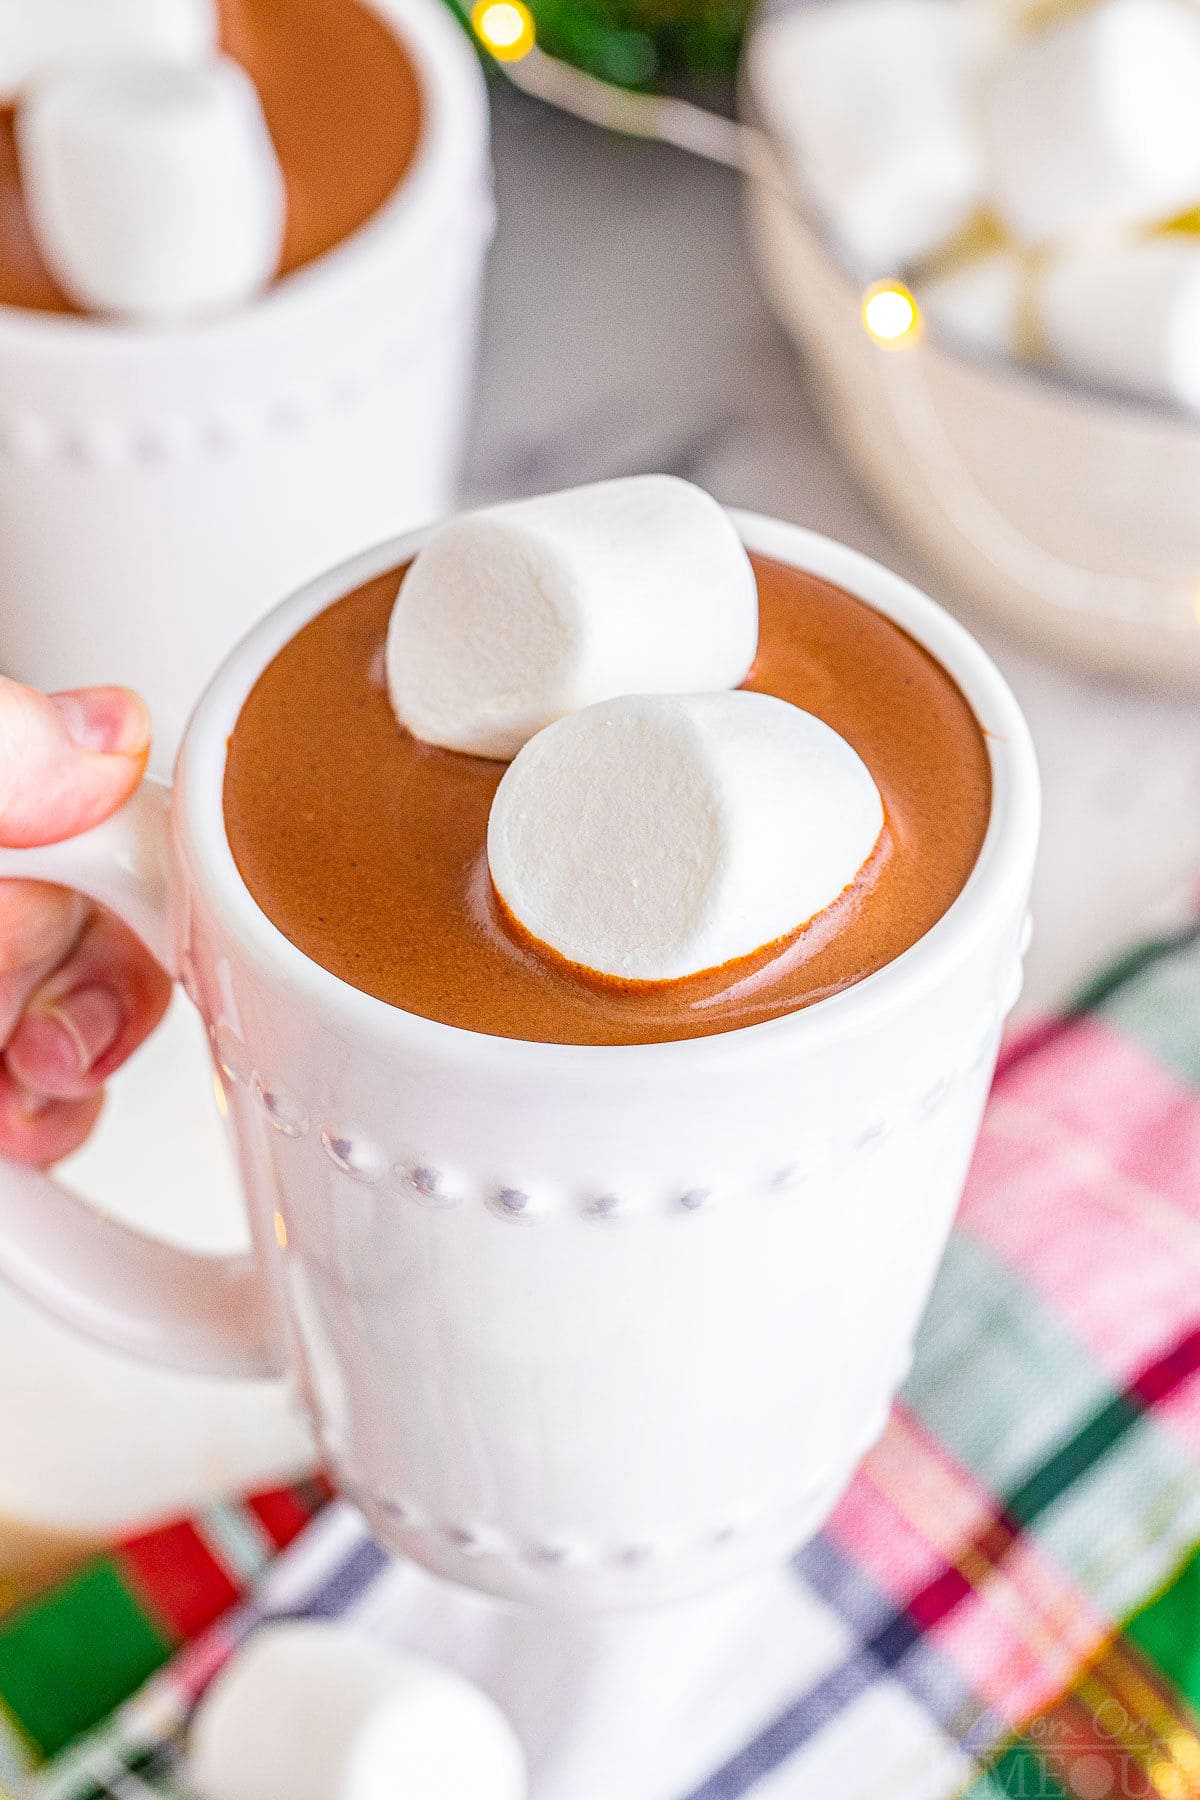 white mug filled with decadent crockpot hot chocolate and topped with two jumbo marshmallows. hand can be seeing holding the mug up and over a christmas linen.